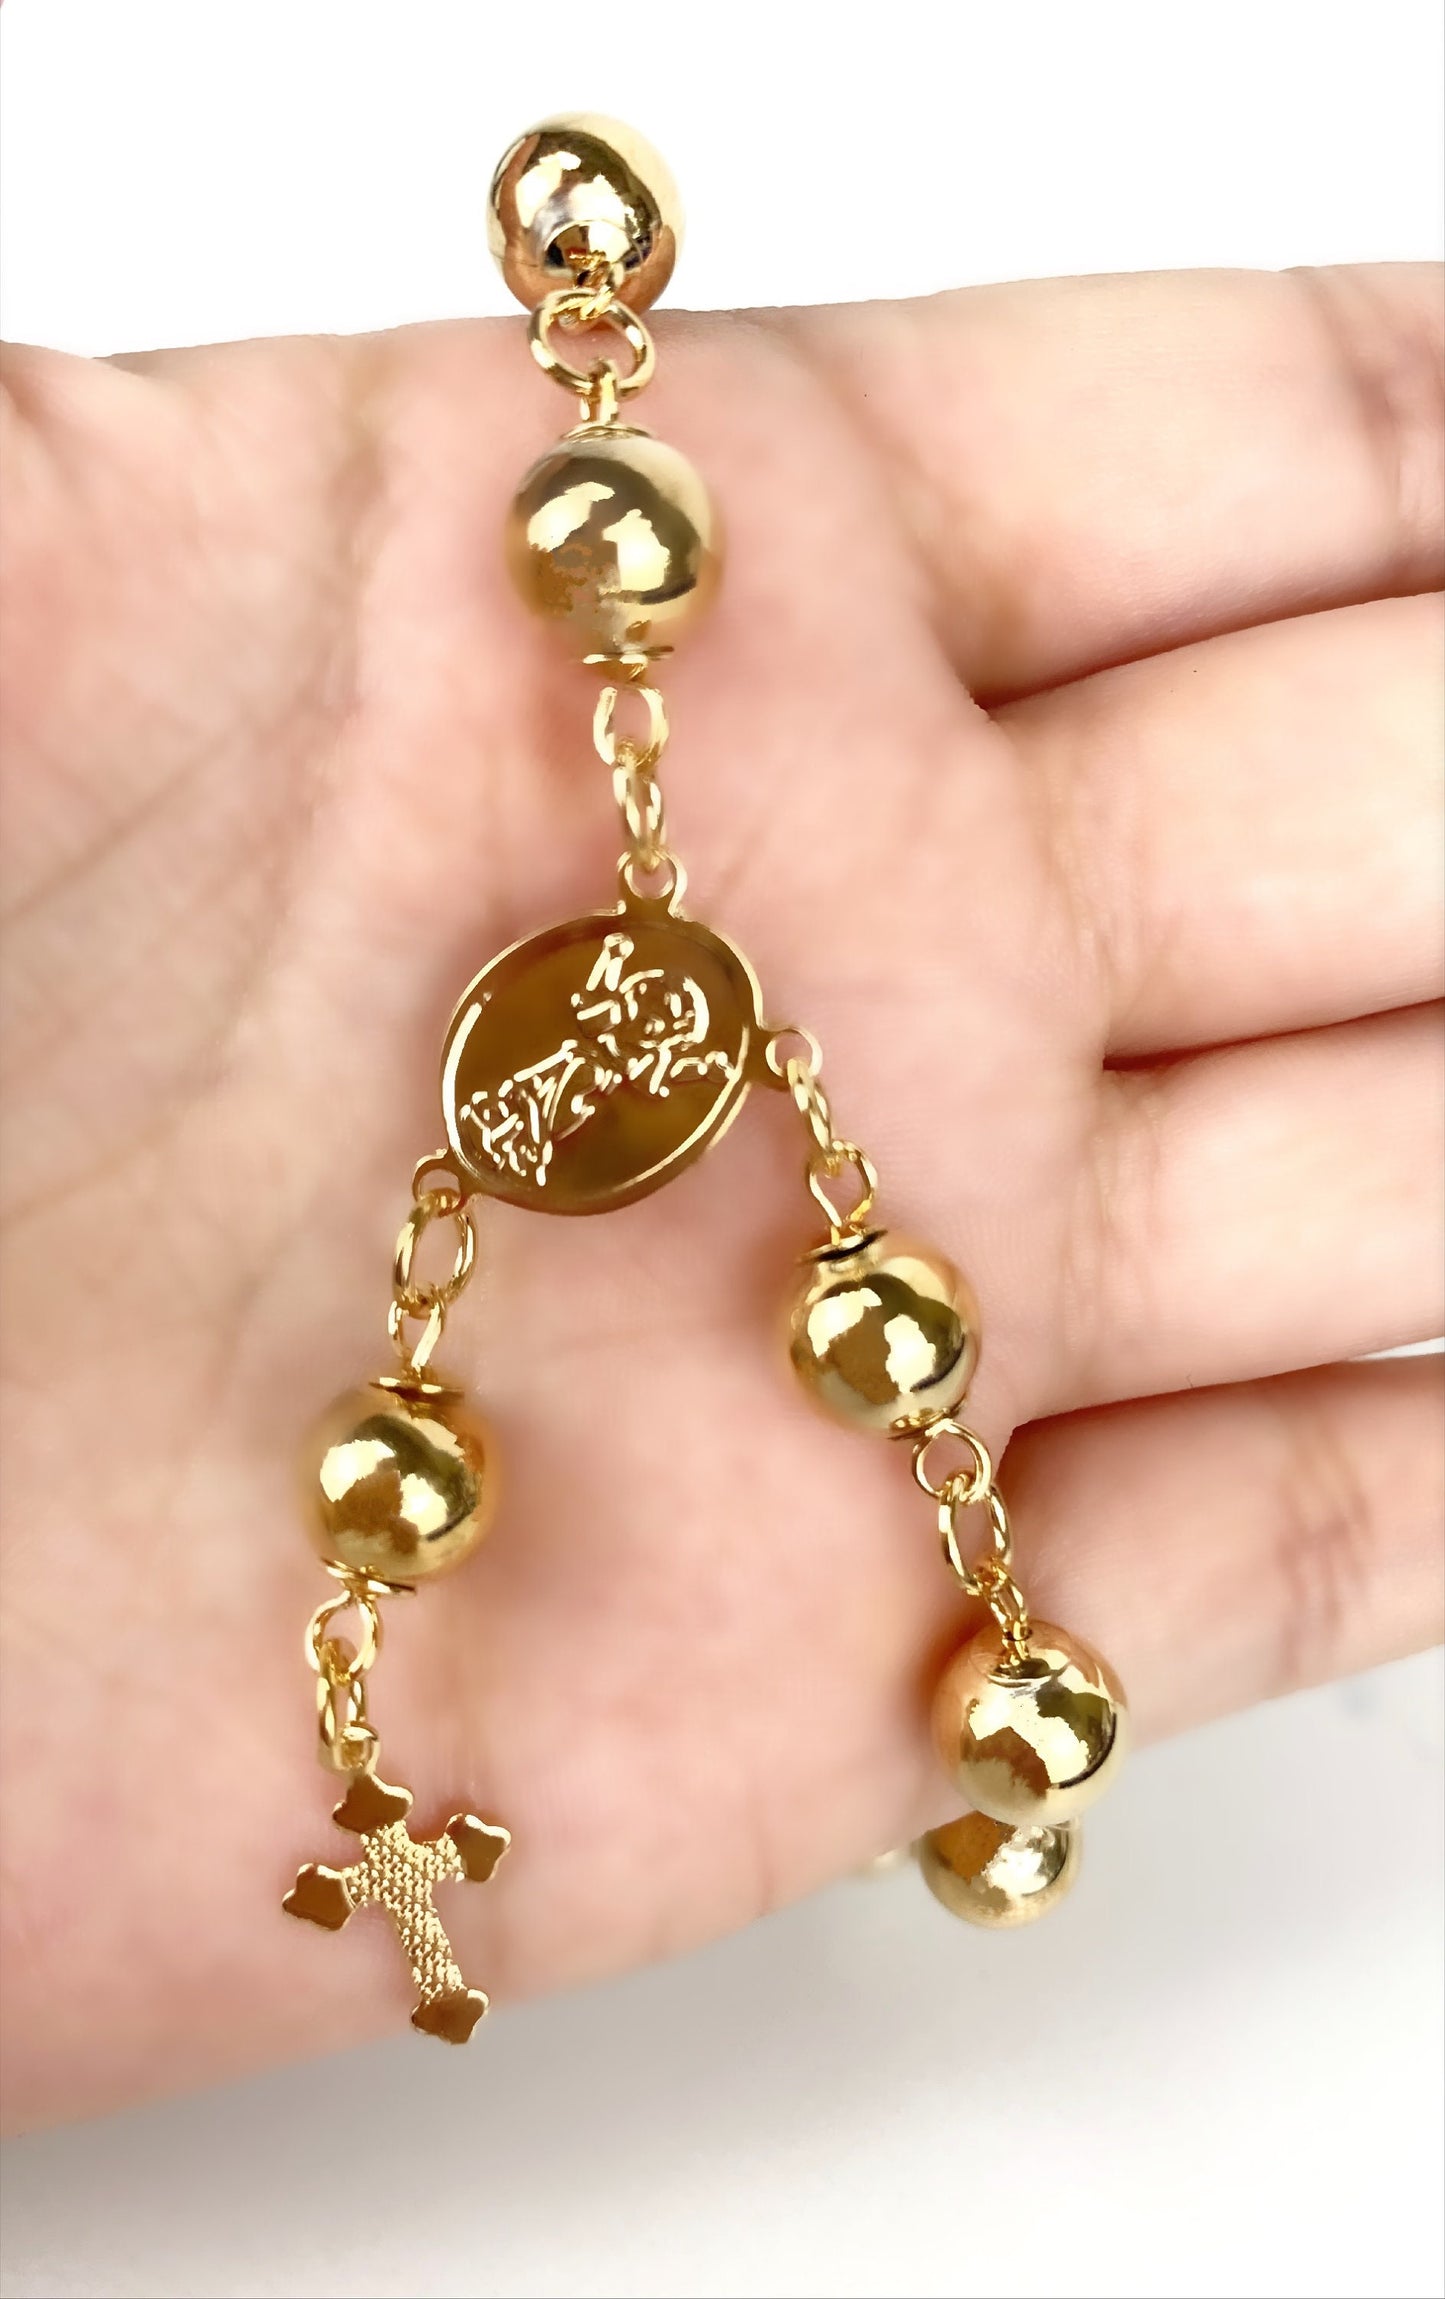 18k Gold Filled Beads Divine Child (El Divino Nino) Rosary Bracelet, Religious Protection, Wholesale Jewelry Supplies